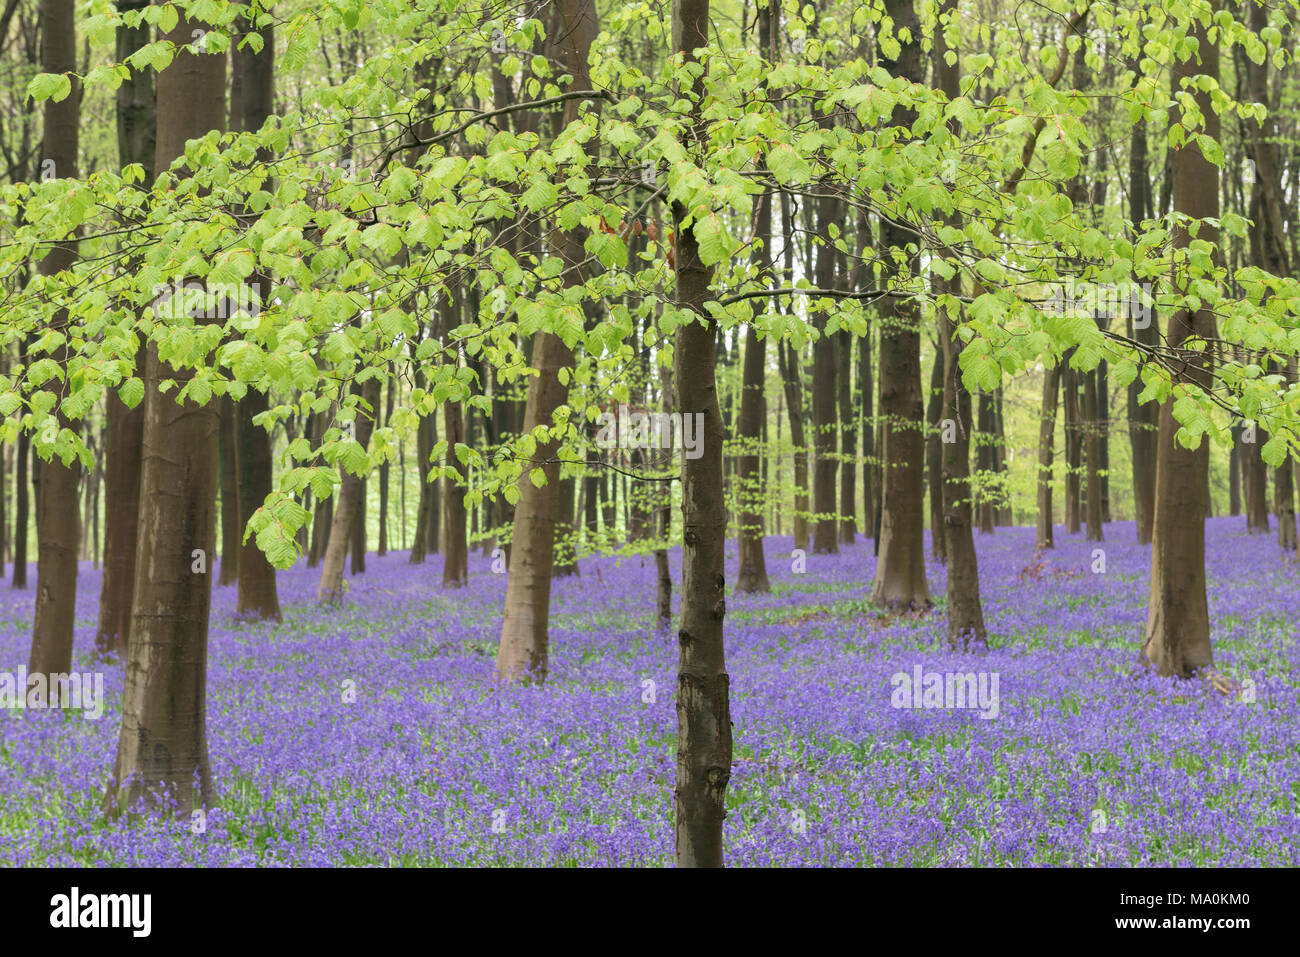 Bluebells carpet the woodland floor beneath the lime green leaves of a young Beech tree in woods near to Micheldever in Hampshire, England. An overnig Stock Photo